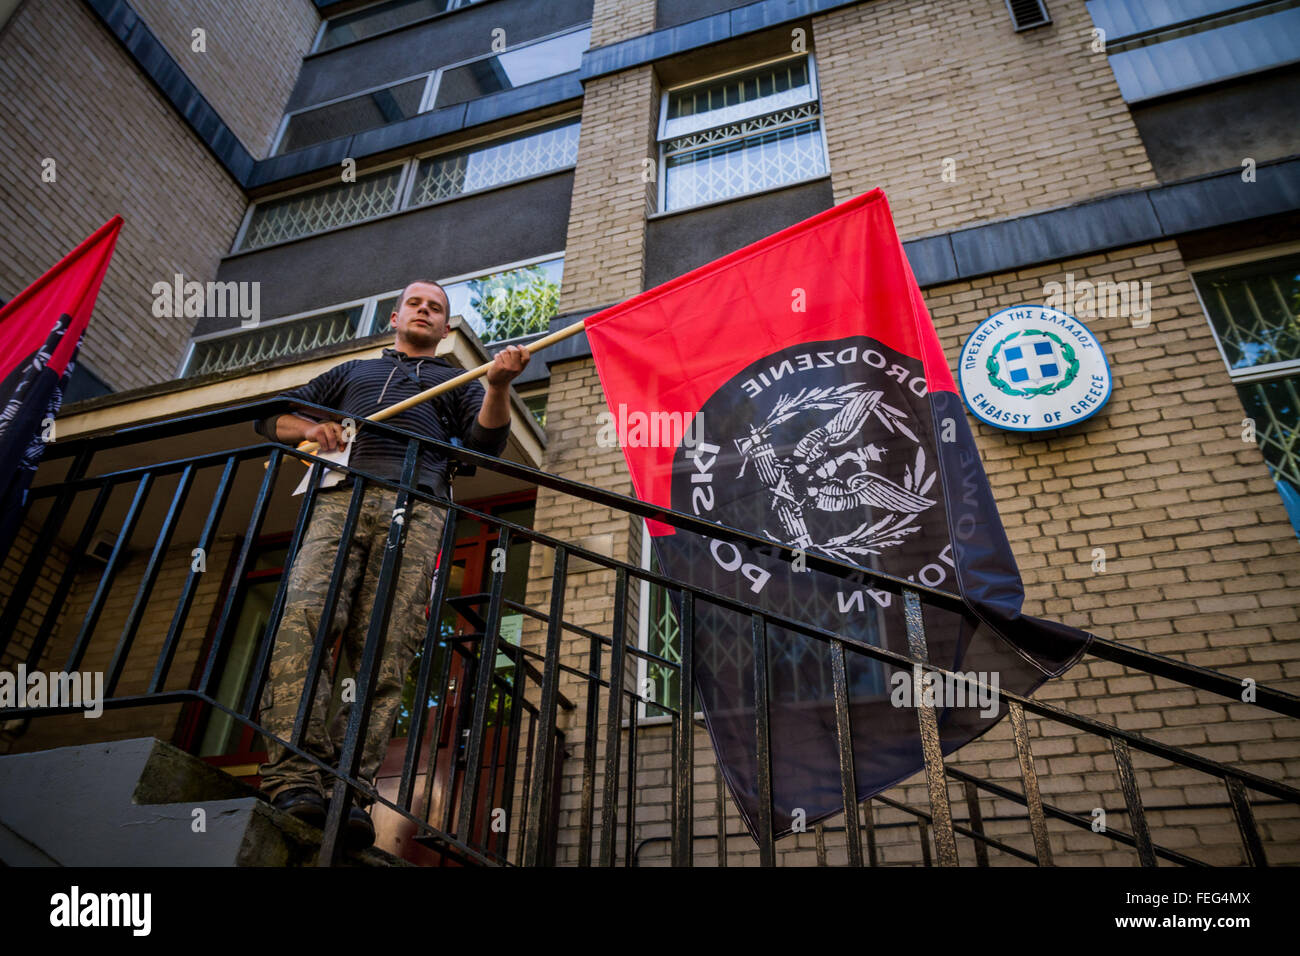 London, UK. 6th October, 2013. Members of Poland’s nationalist far-right ‘National Rebirth of Poland’ protest outside the Greek Embassy to demand the release of Nikos Michaloliakos the leader of Golden Dawn, Greece’s right-wing extremist party, who was arrested by the Greek authorities on August 28th 2013 Credit:  Guy Corbishley/Alamy Live News Stock Photo